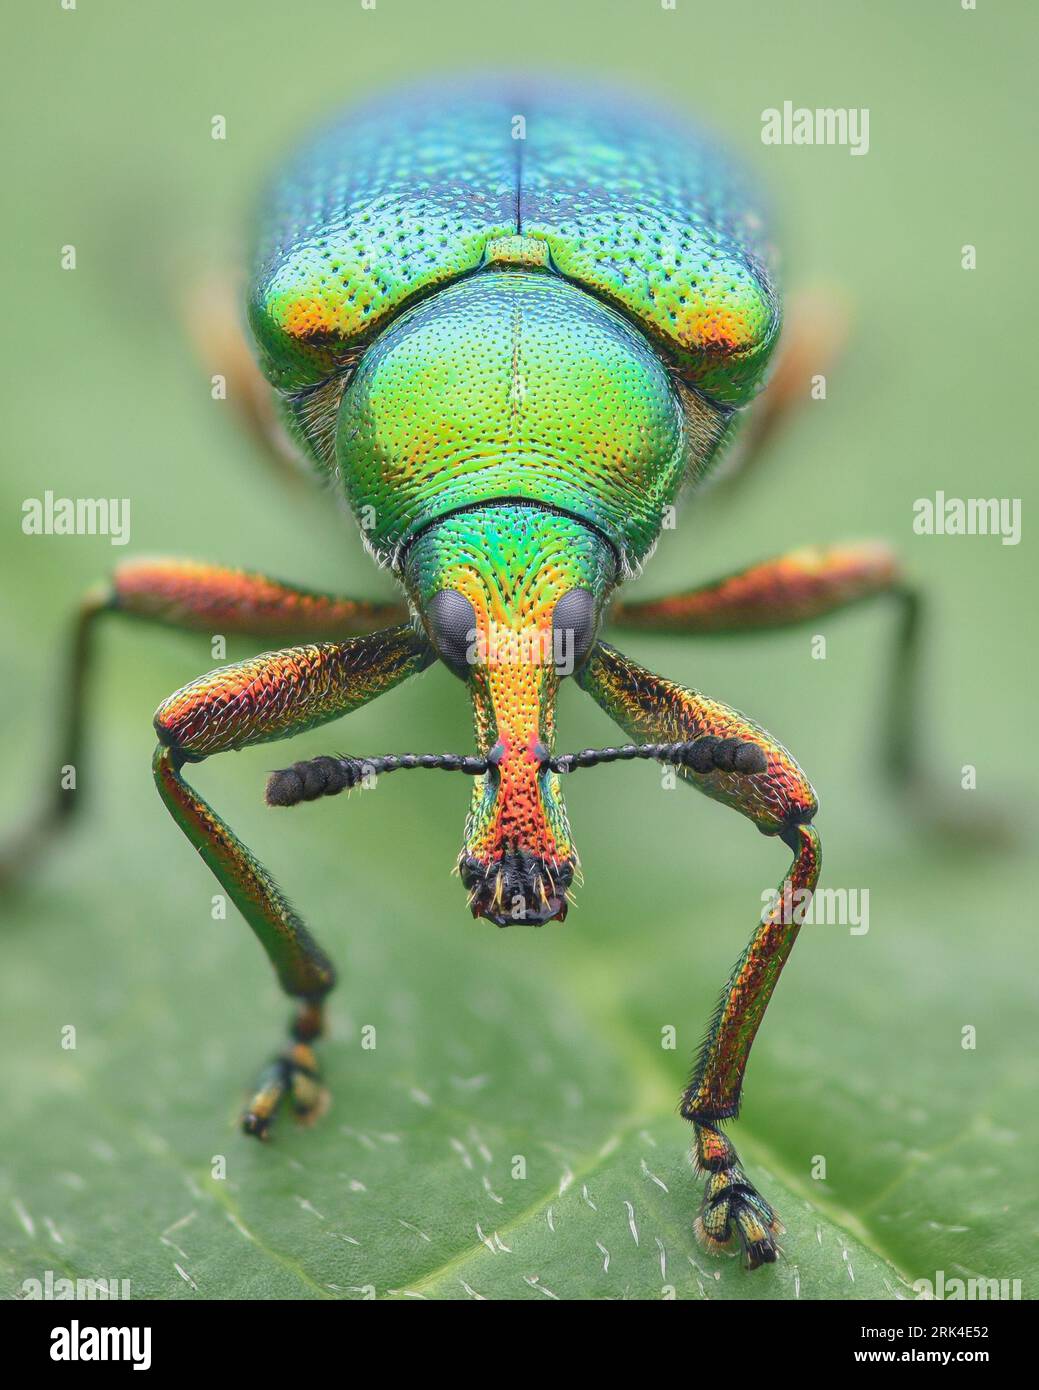 Portrait of a multicolored, iridescent leaf-rolling weevil (a type of beetle) standing on a green leaf (Byctiscus betulae) Stock Photo